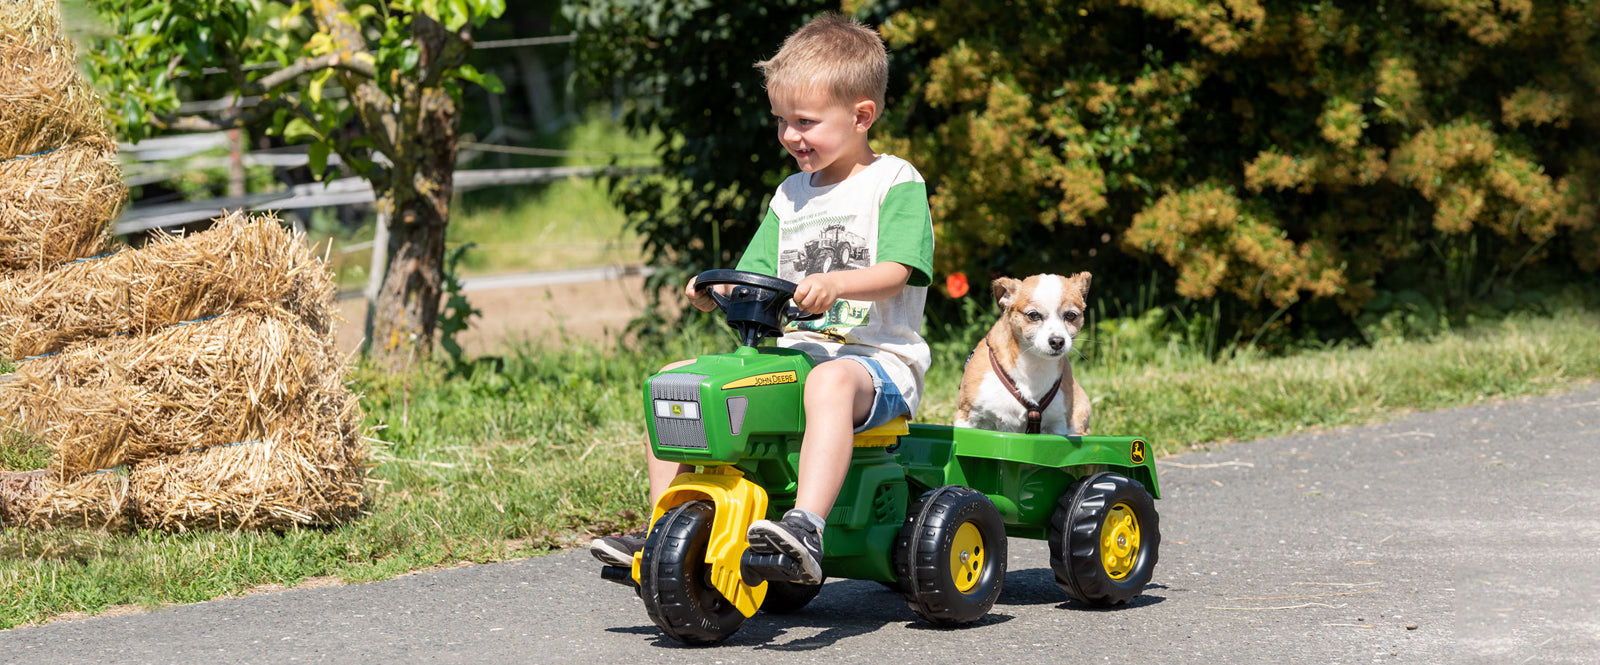 John Deere by Rolly Toys pedal vehicles and ride-ons provide kids with endless opportunity for creative and imaginative active play.